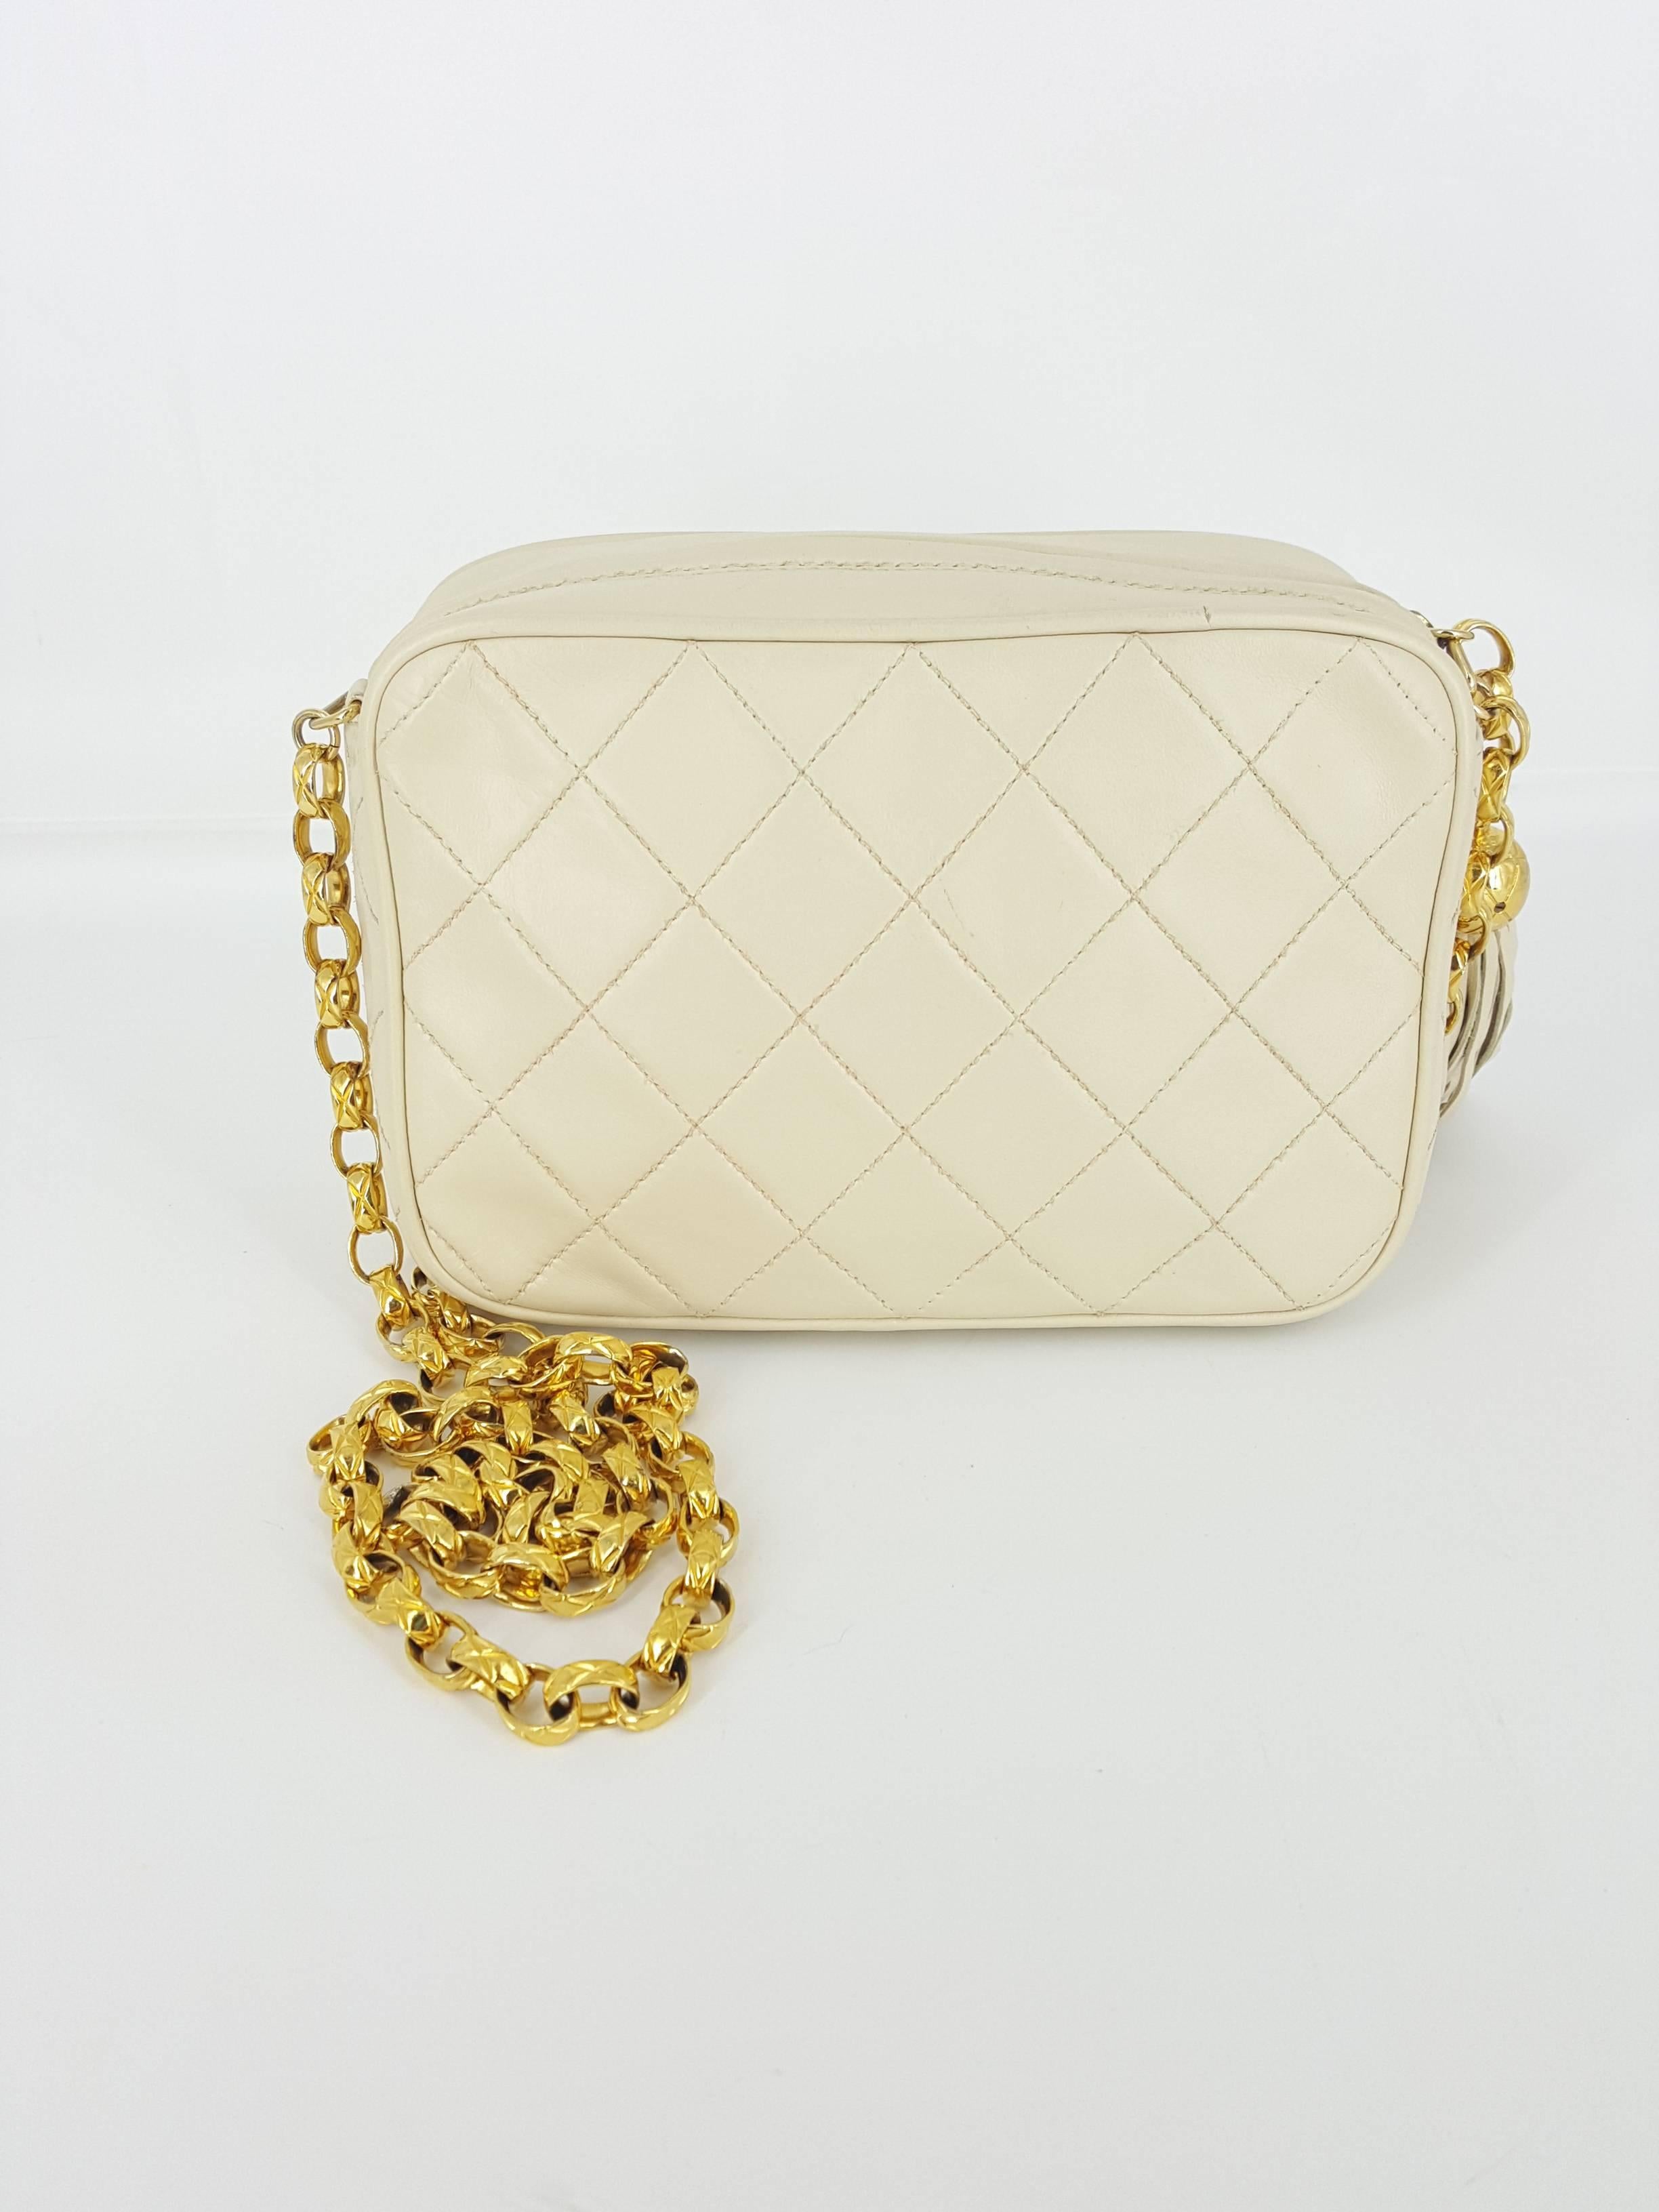 Offered for sale is this beautiful cream colored lambskin Chanel camera bag with long tassel and gold hardware.  The 20 1/2